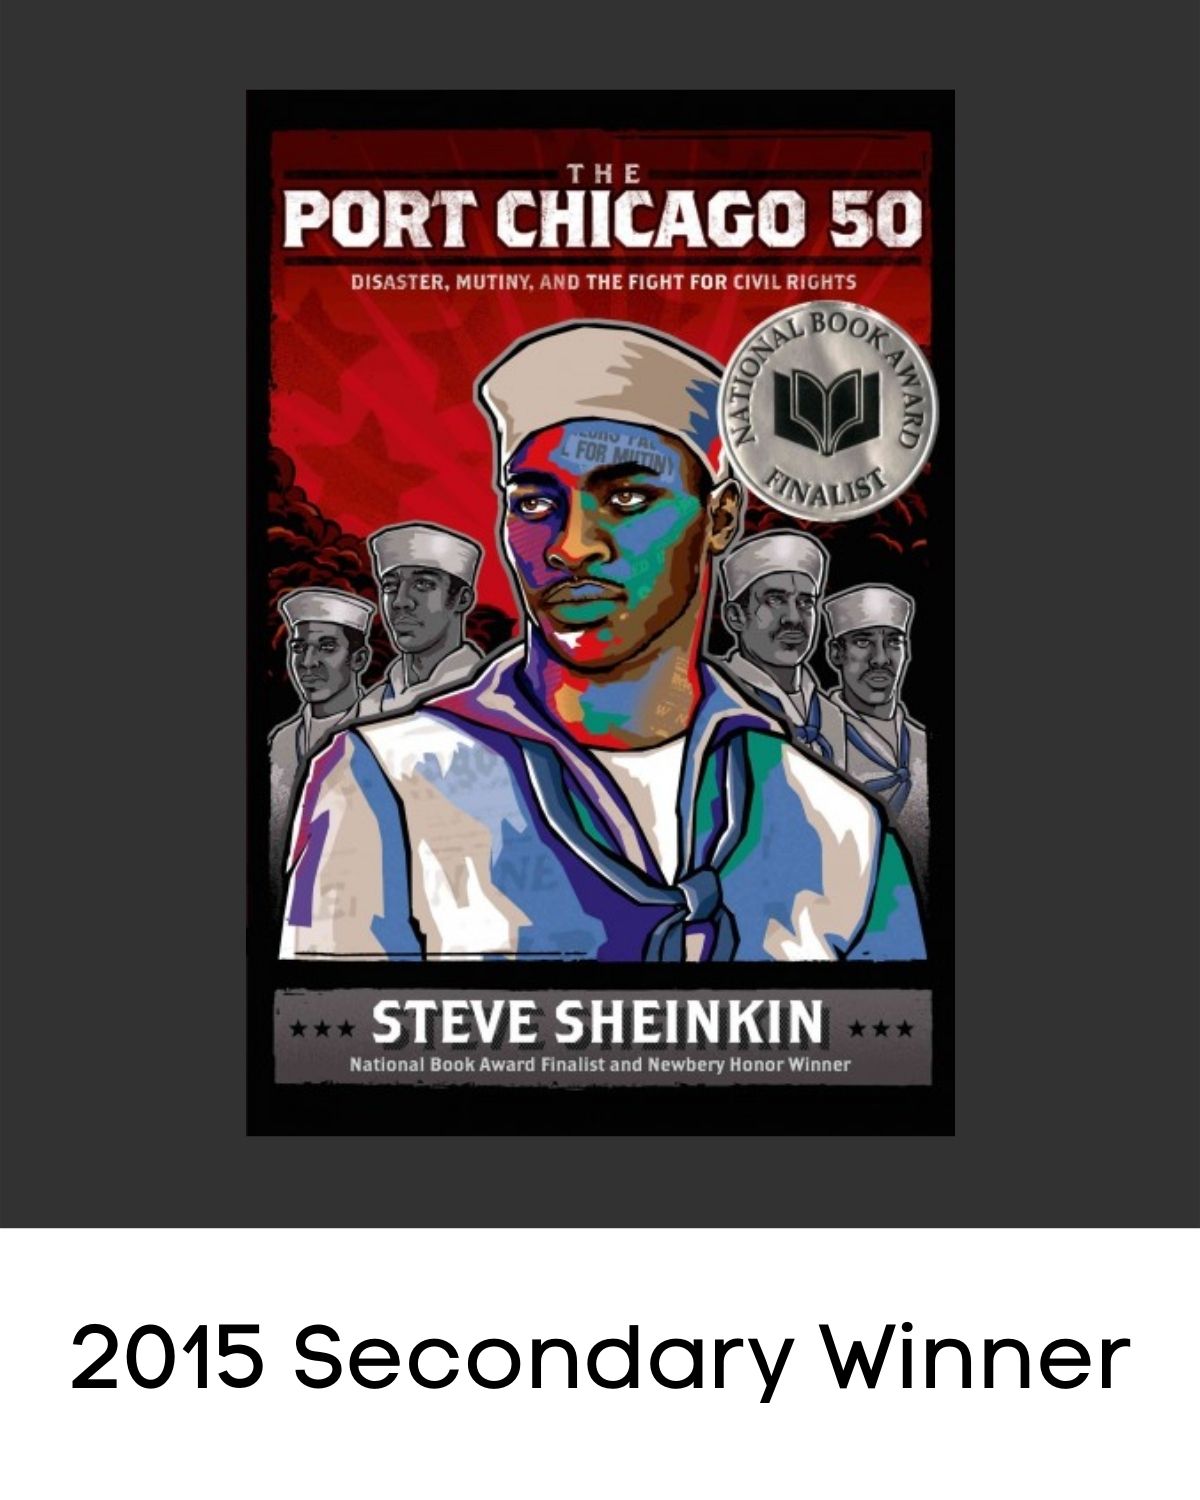 The Port Chicago 50: Disaster, Mutiny, and the Fight for Civil Rights book cover